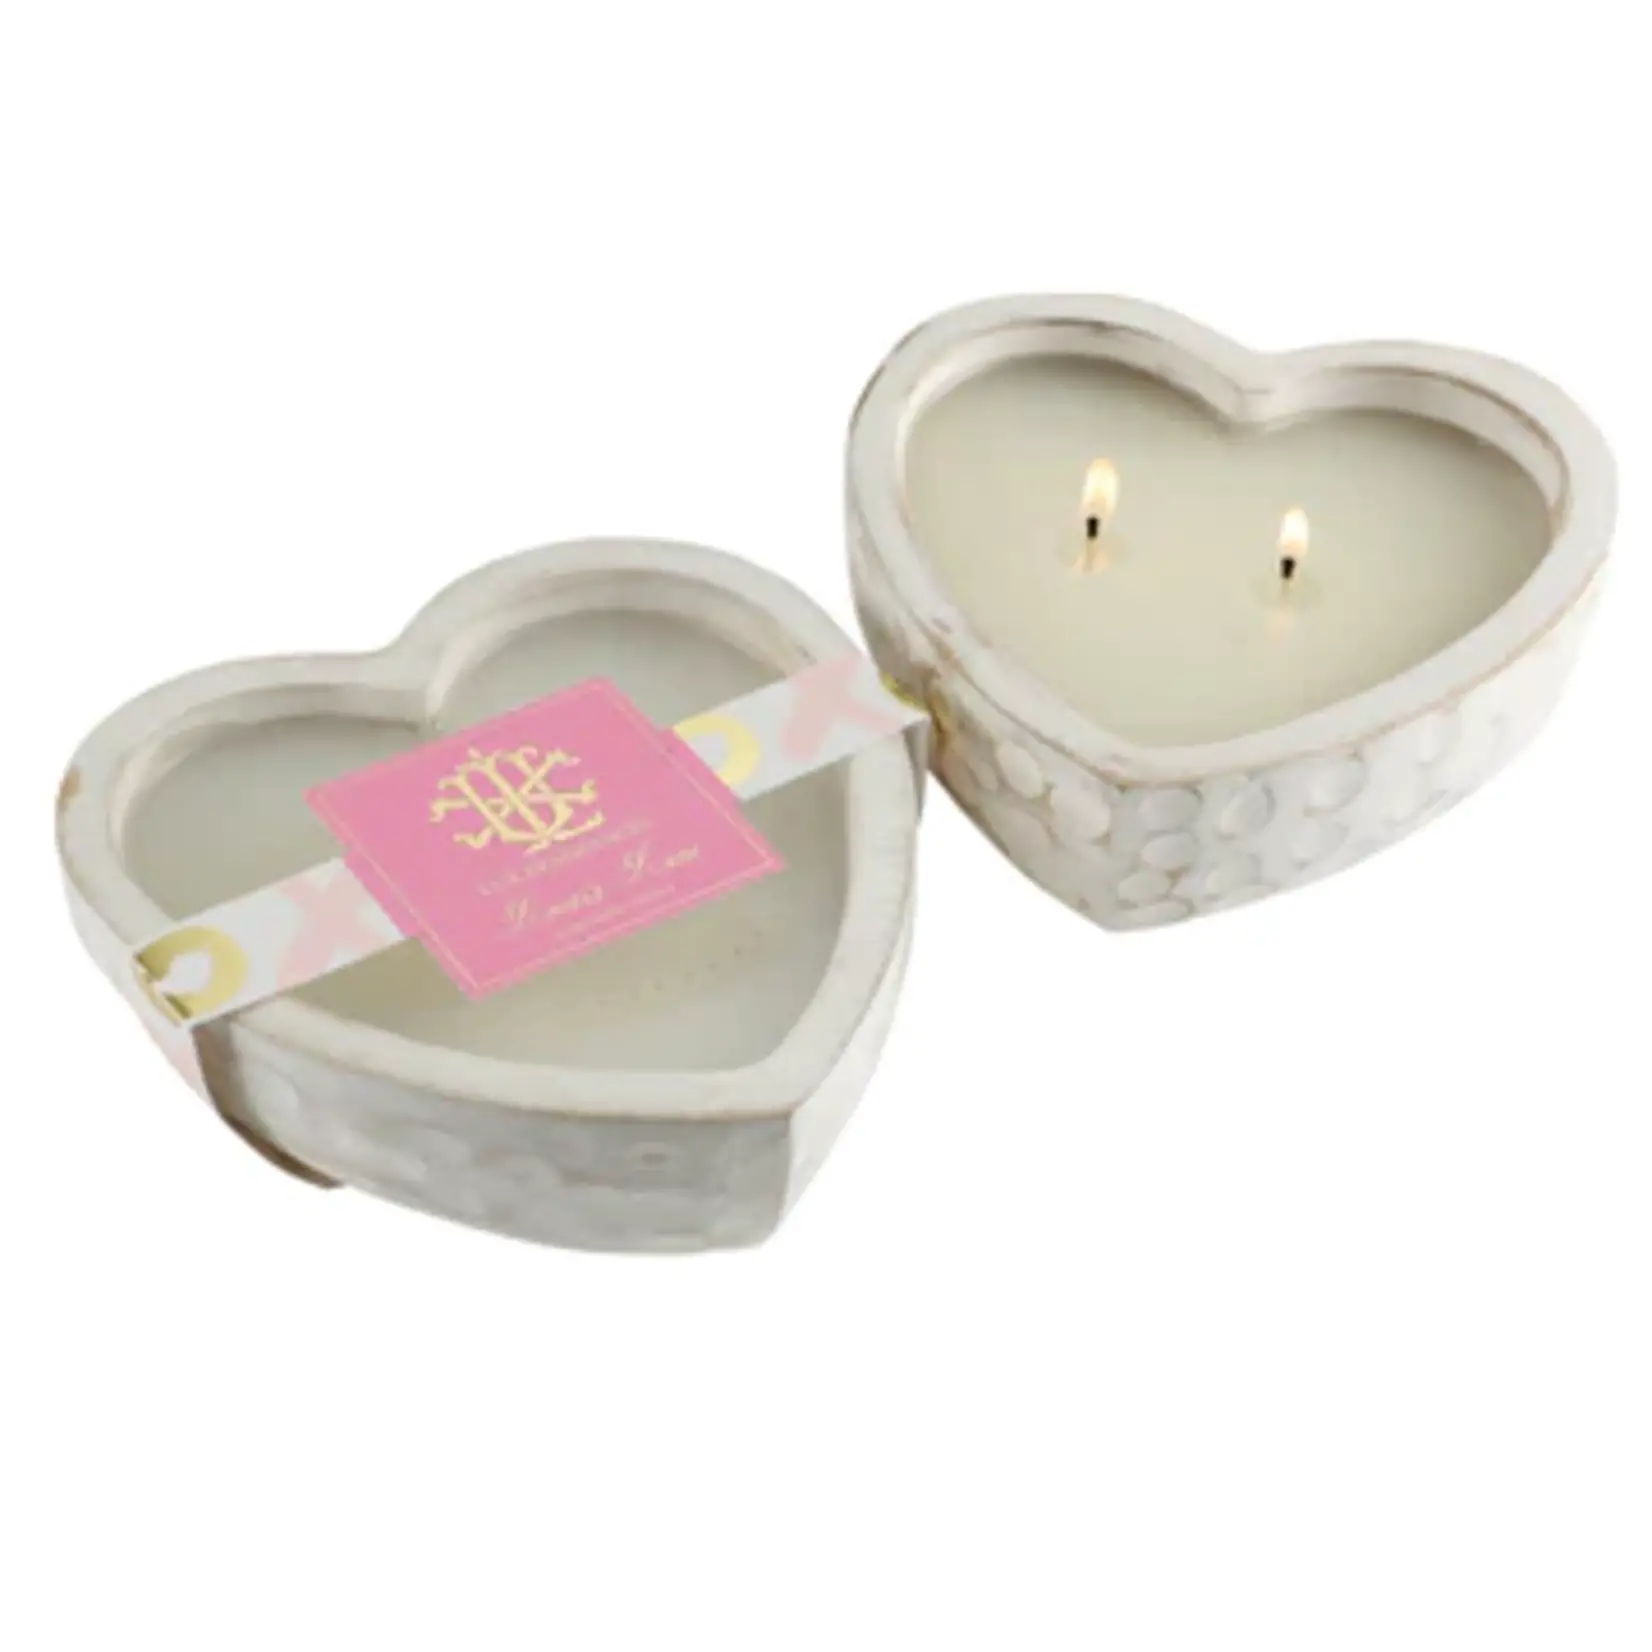 Lux Lover's Lane Heart Bowl Candle